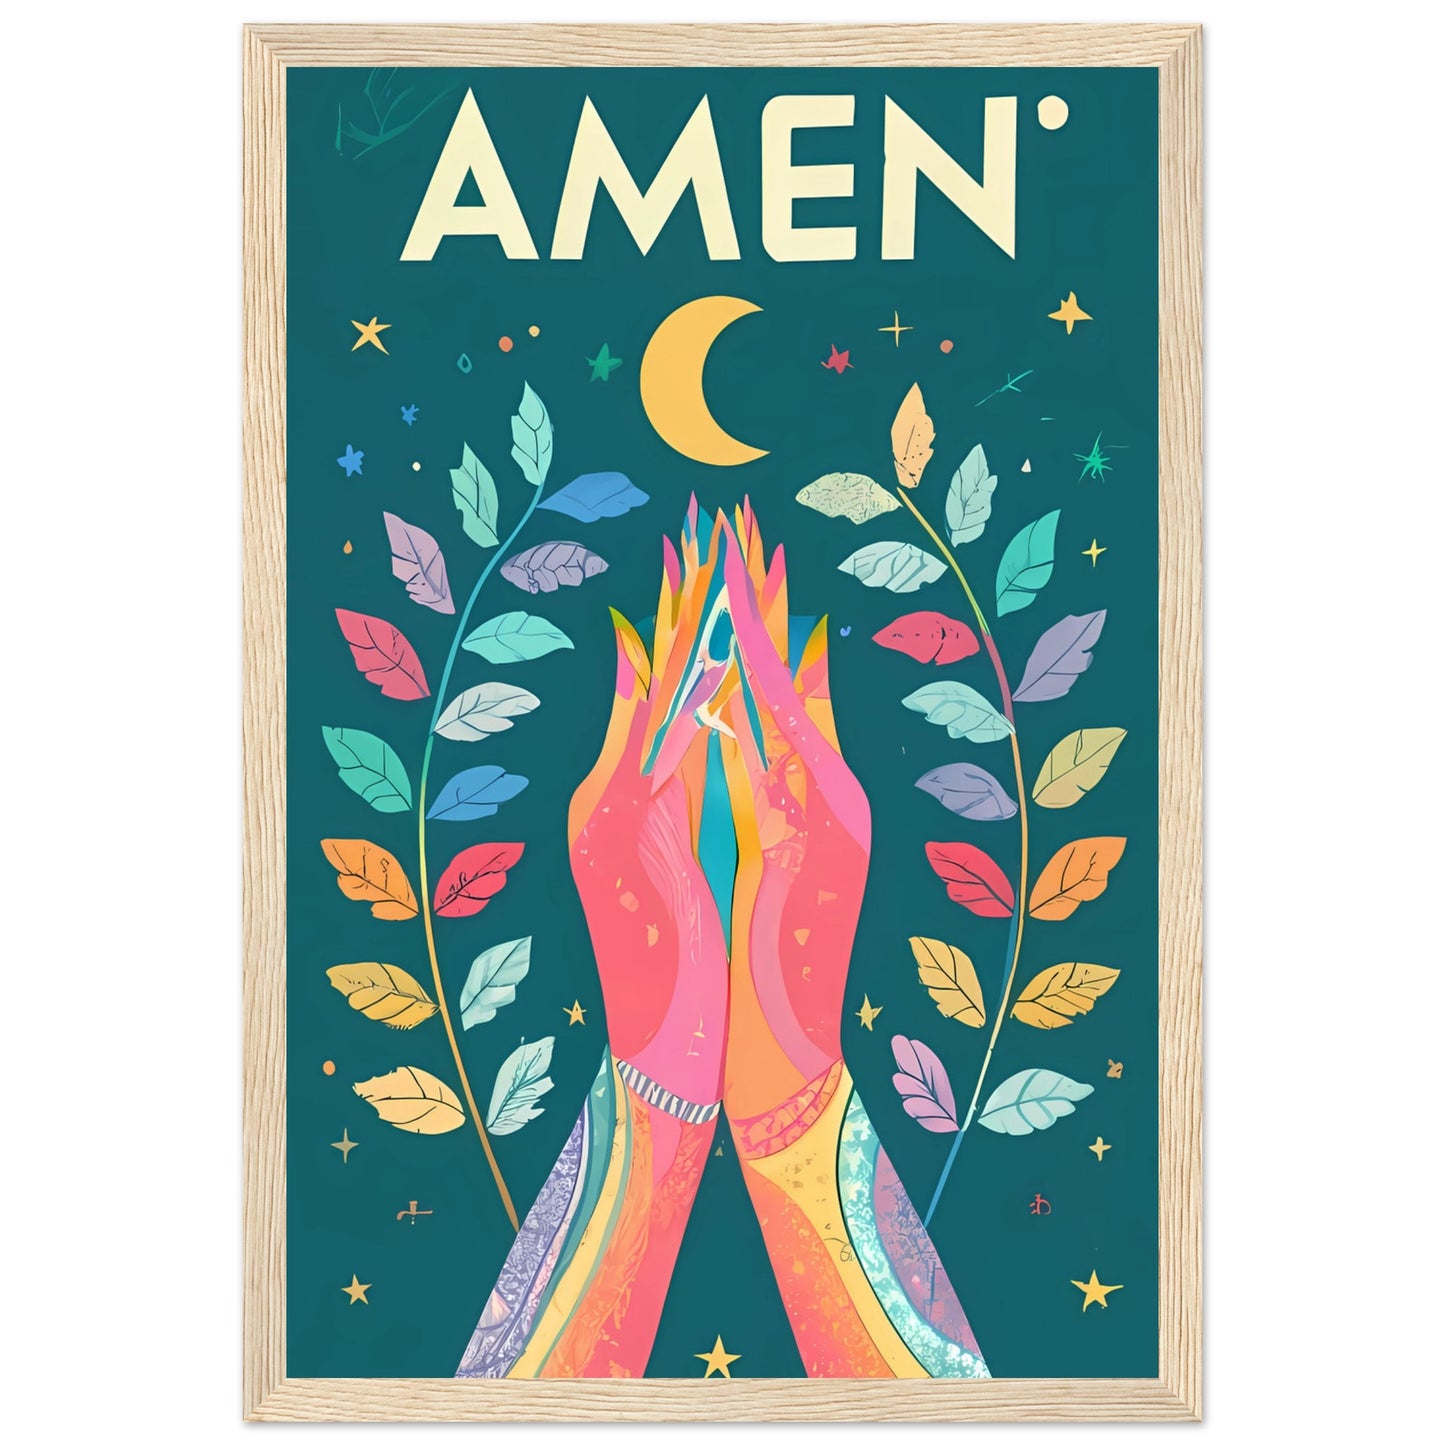 AMEN Hands Raised in Worship Framed Poster with Rainbow Floral, Star, and Moon